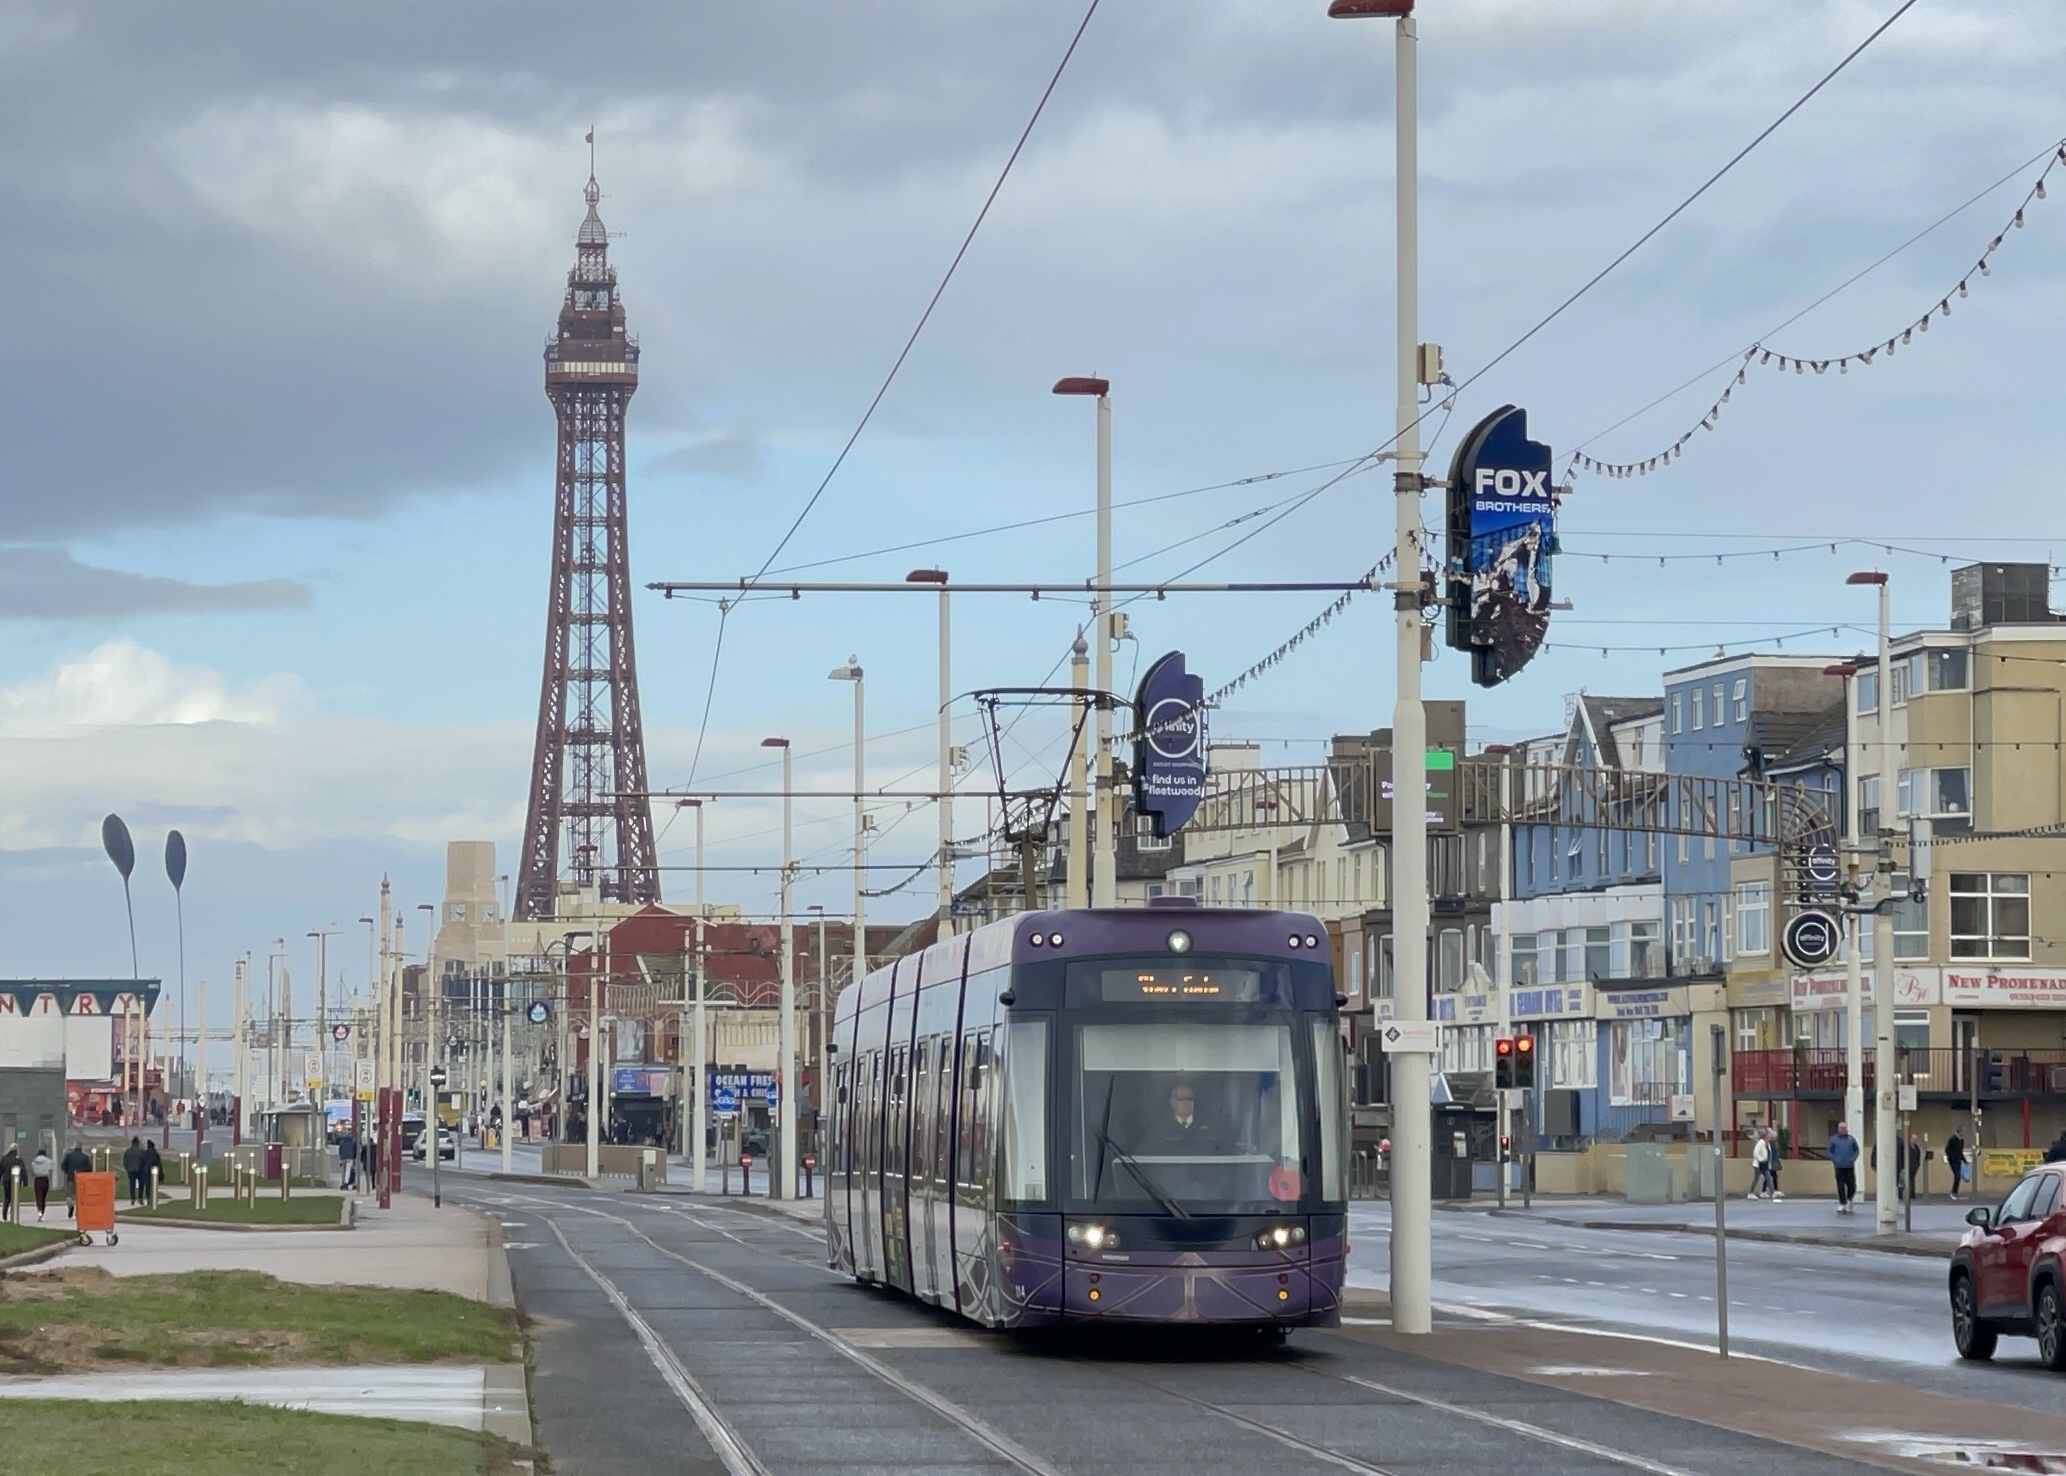 Blackpool Tower in the background with a tram in the foreground